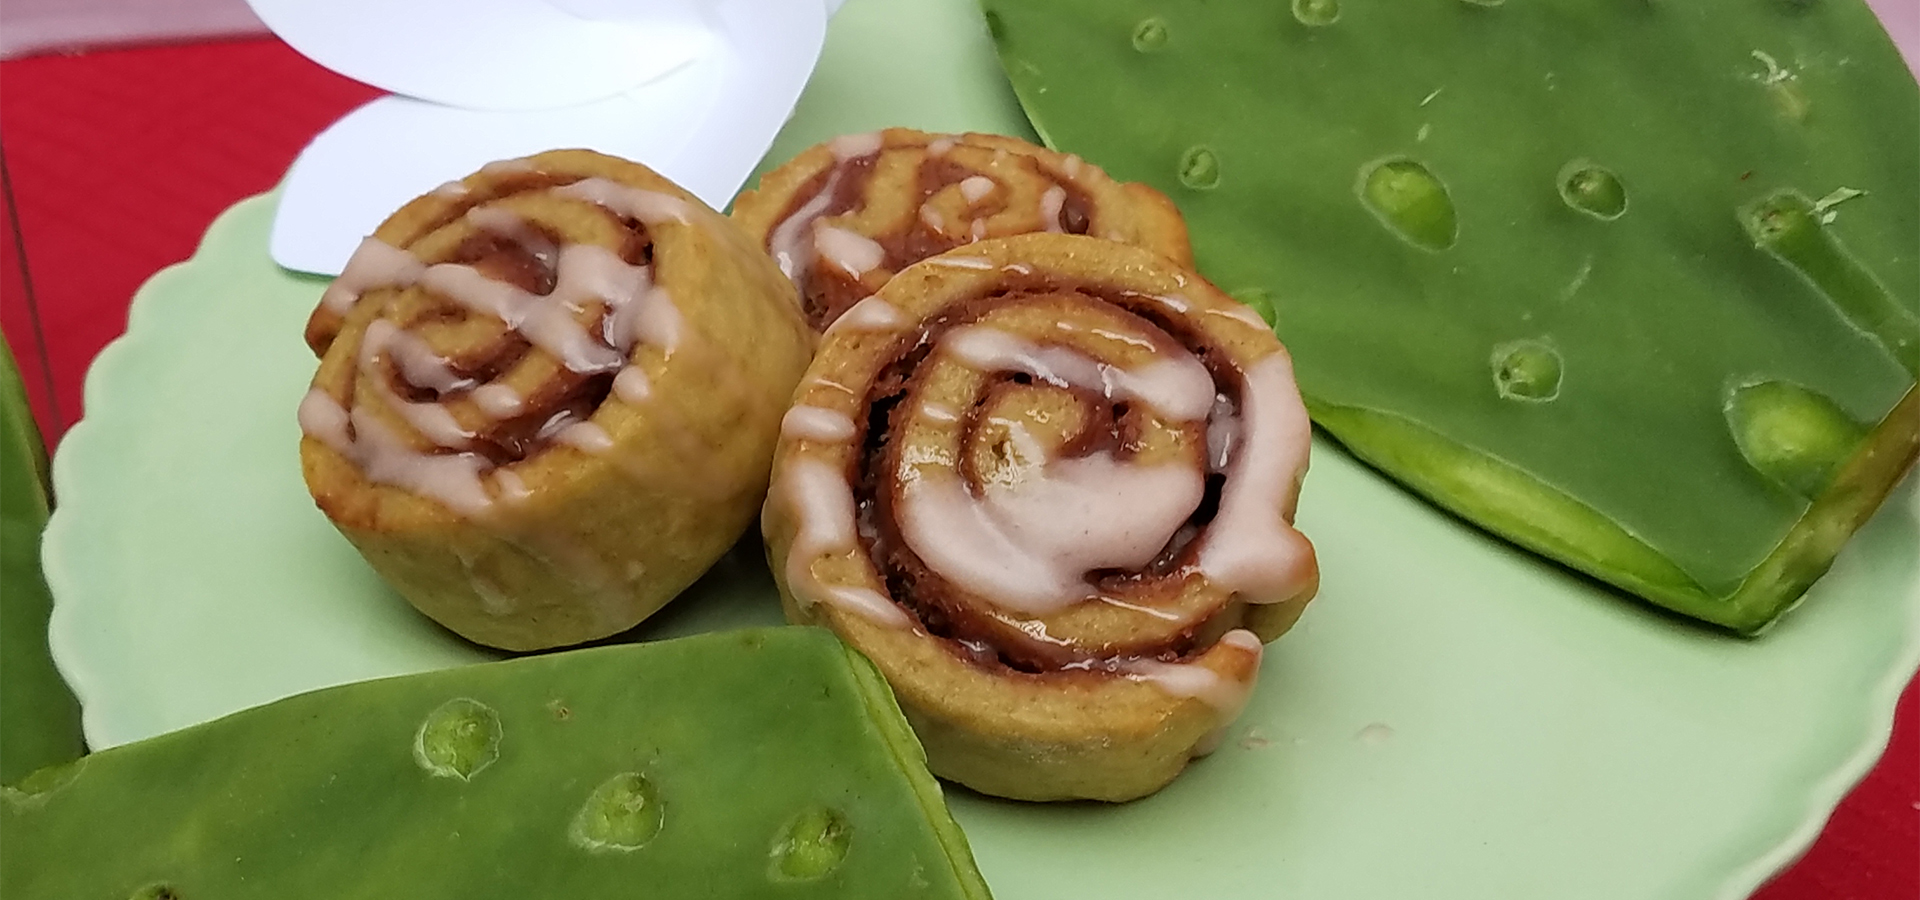 A green plate with a trio of Upswirlz, which look like mini cinnamon rolls